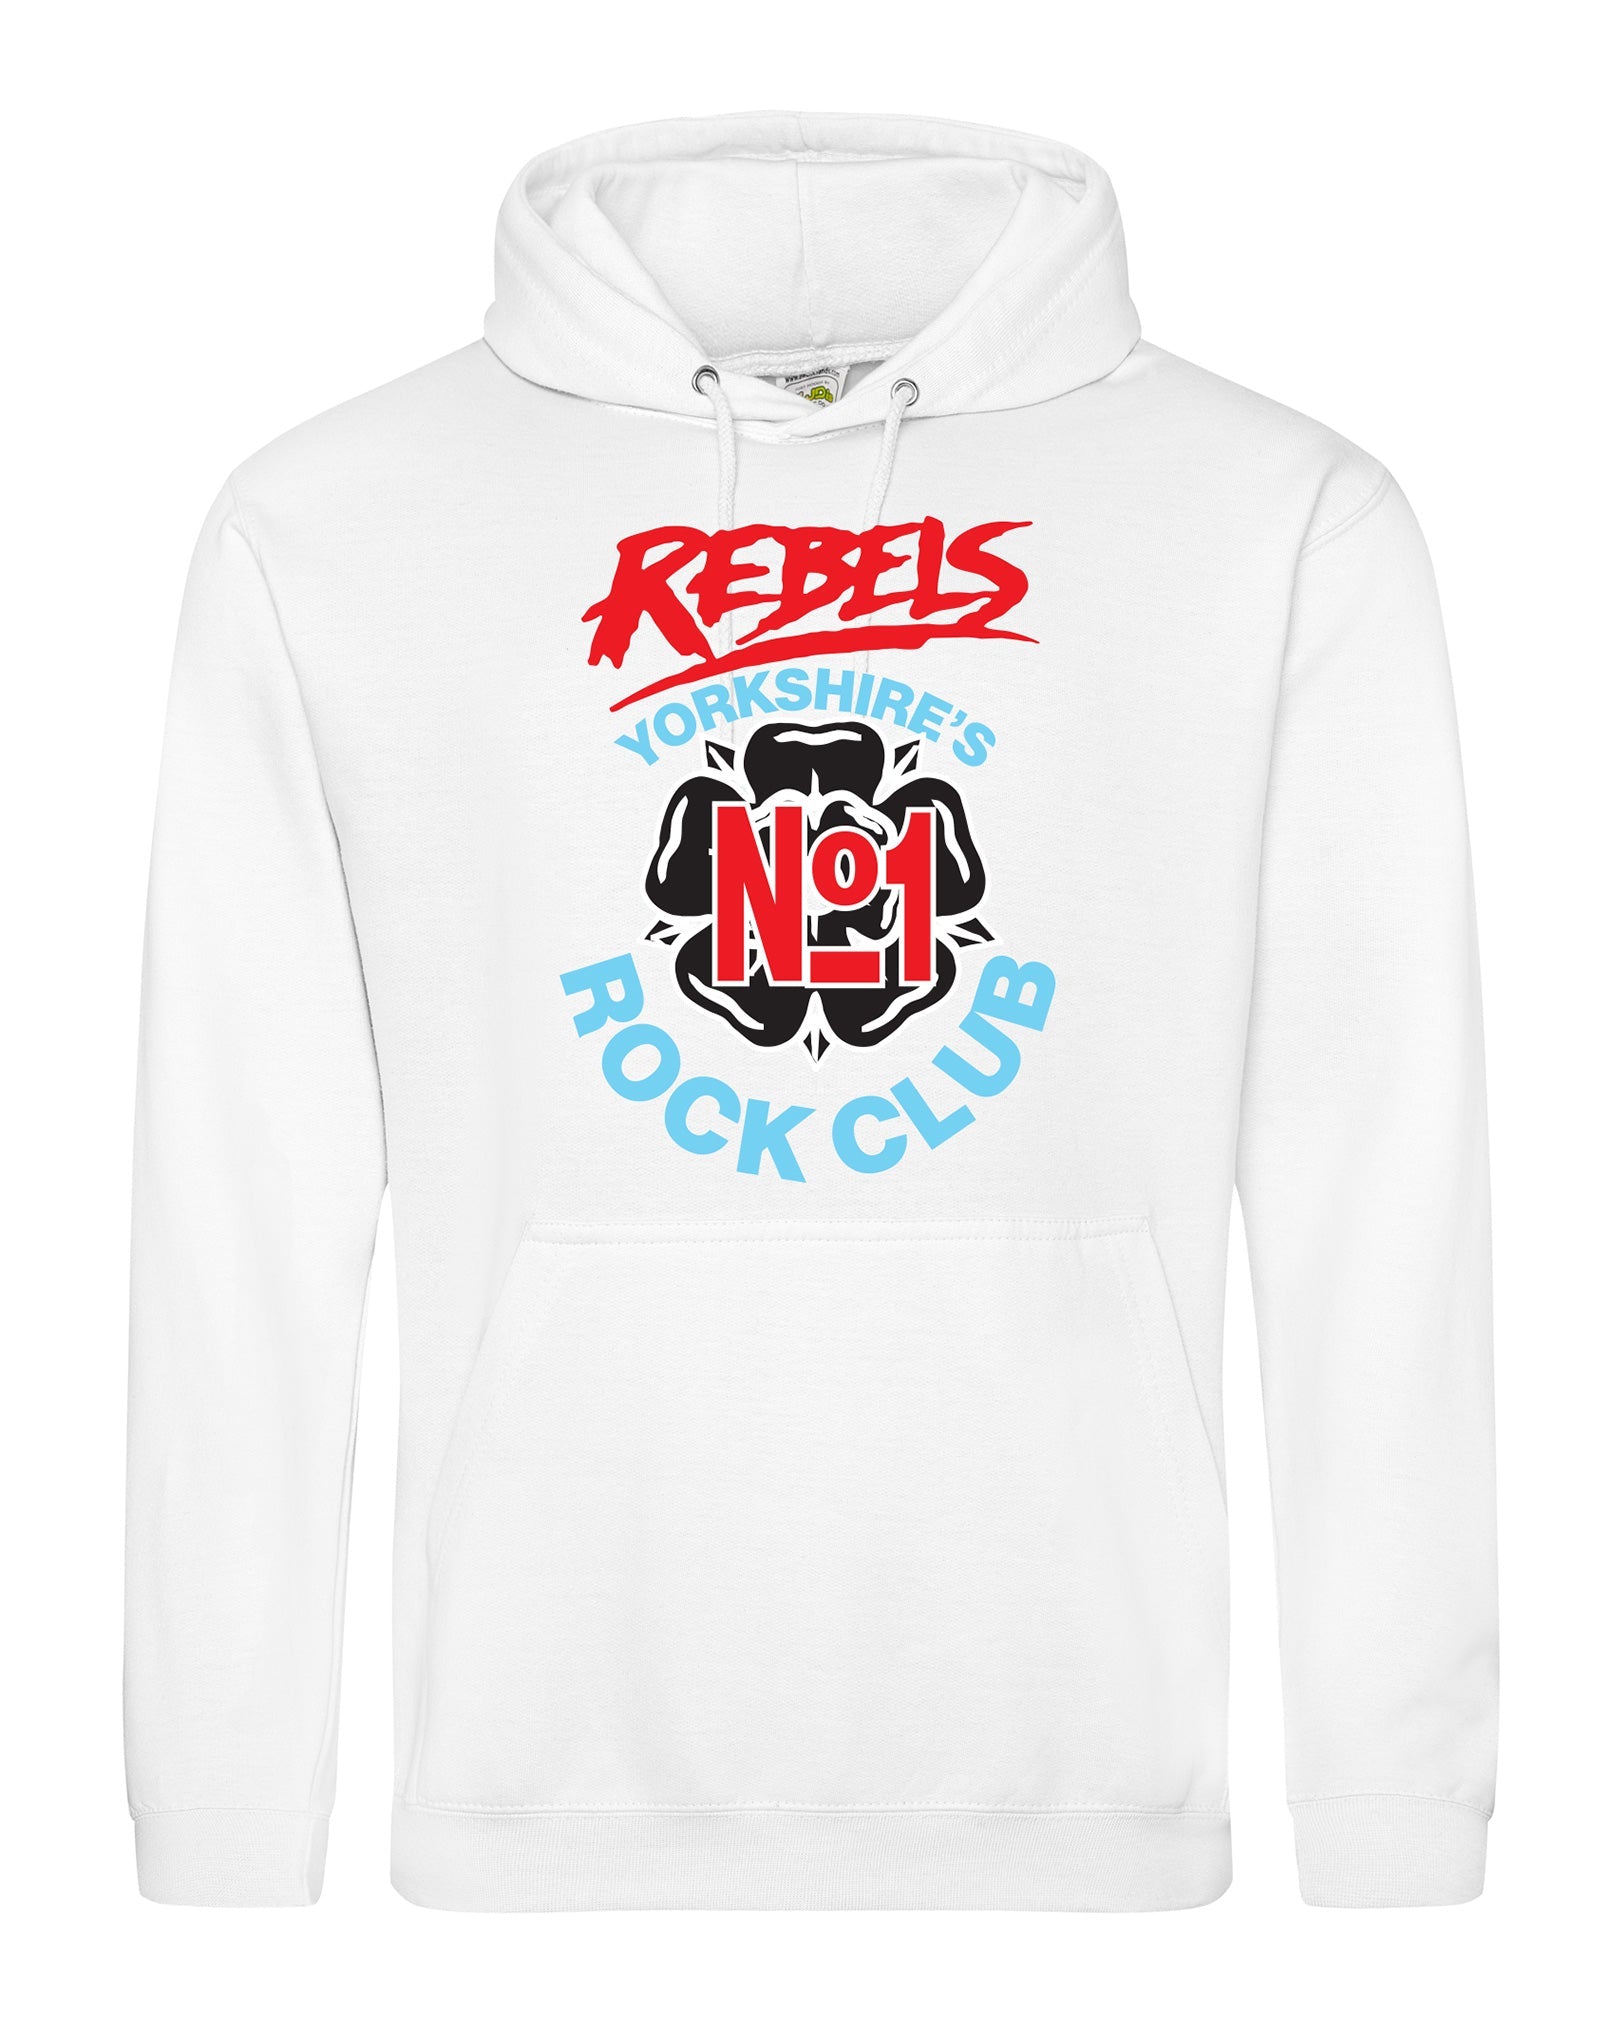 Rebels No. 1 rock club unisex fit hoodie - various colours - Dirty Stop Outs